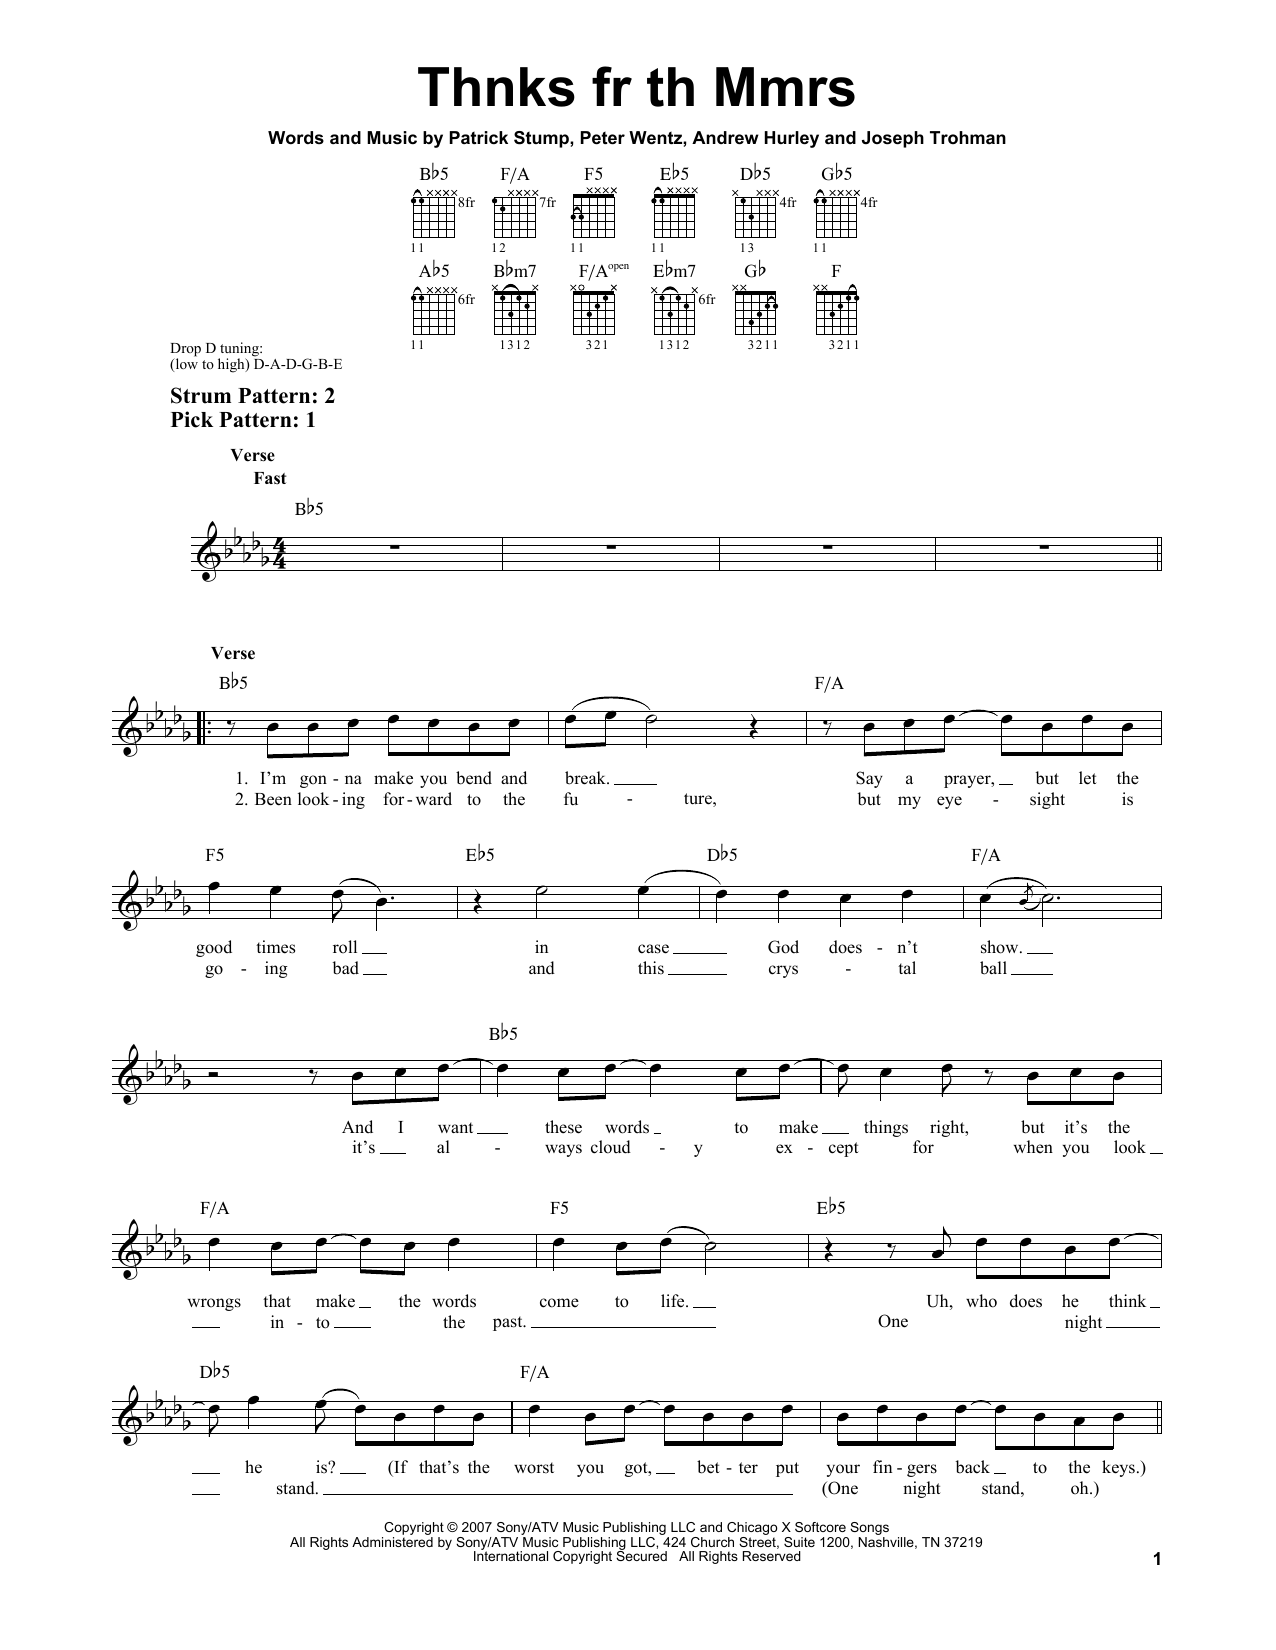 Download Fall Out Boy Thnks Fr Th Mmrs Sheet Music